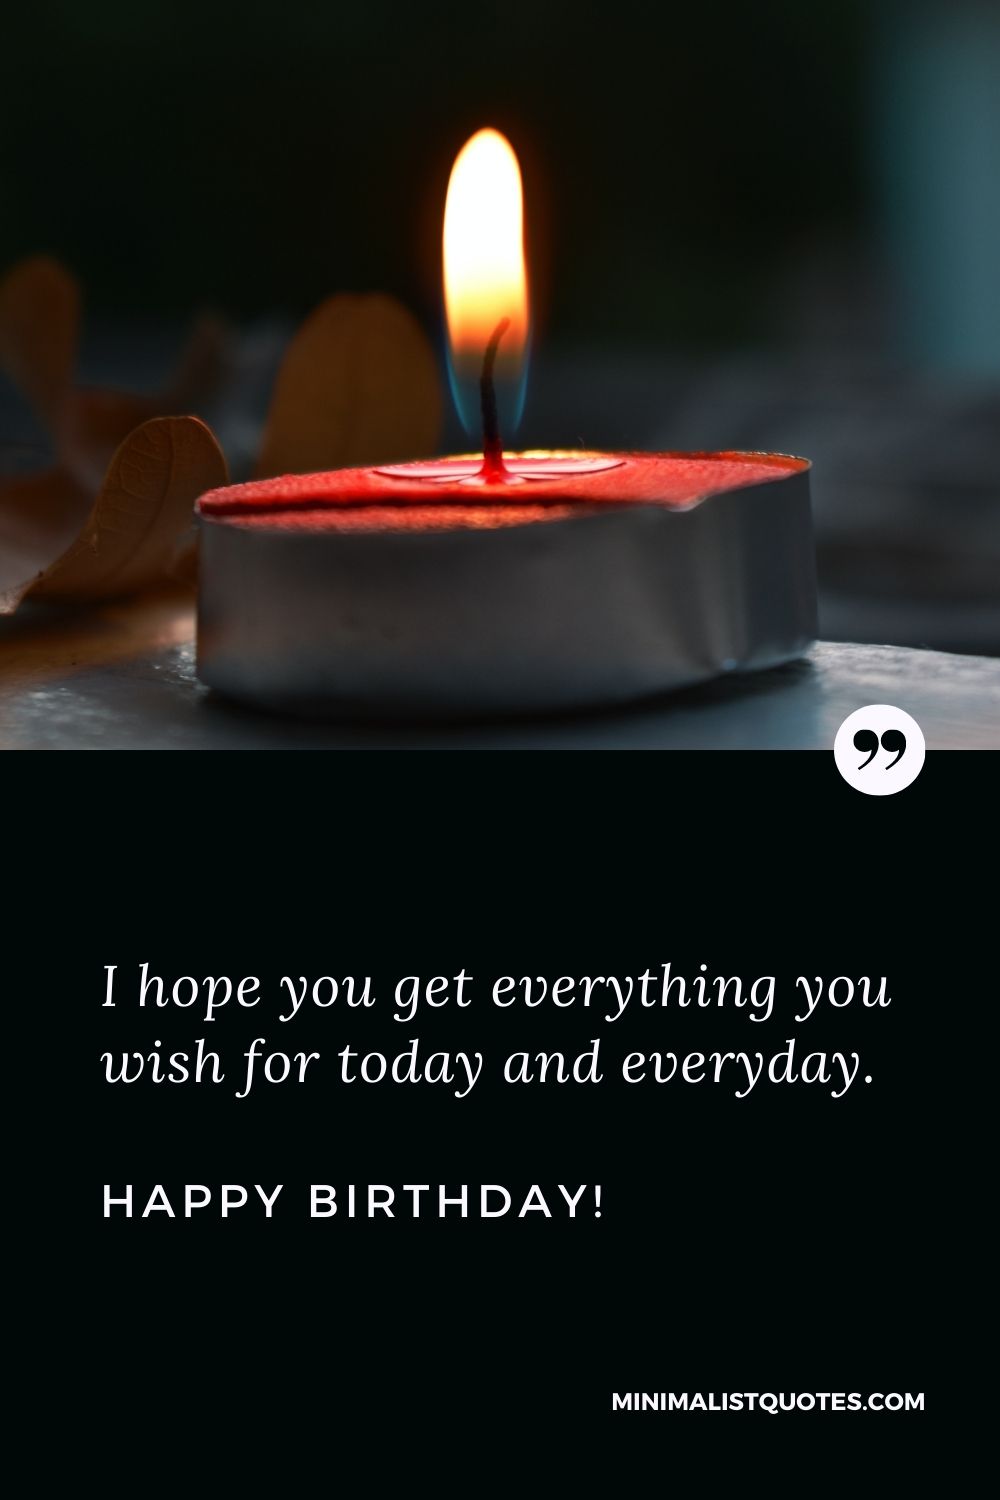 Birthday Quote, Wish & Message With Image: I hope you get everything you wish for today and everyday. Happy Birthday!